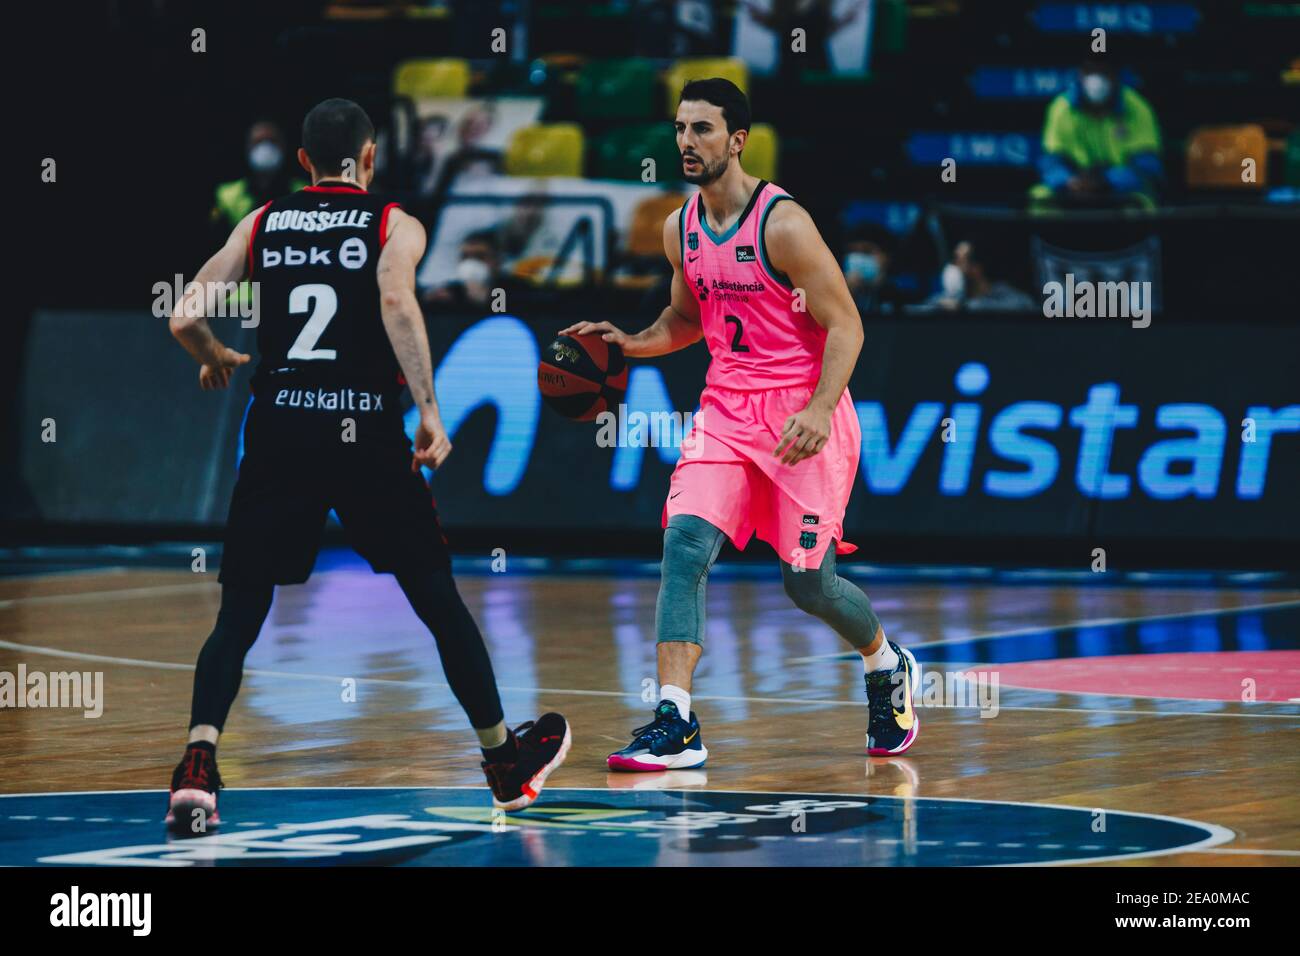 Bilbao, Basque Country, SPAIN. 7th Feb, 2021. LEO WESTERMANN (2) from Barça  with the ball during the Liga ACB week 23 game between Retabet Bilbao Basket  and Barça at Miribilla Bilbao Arena.